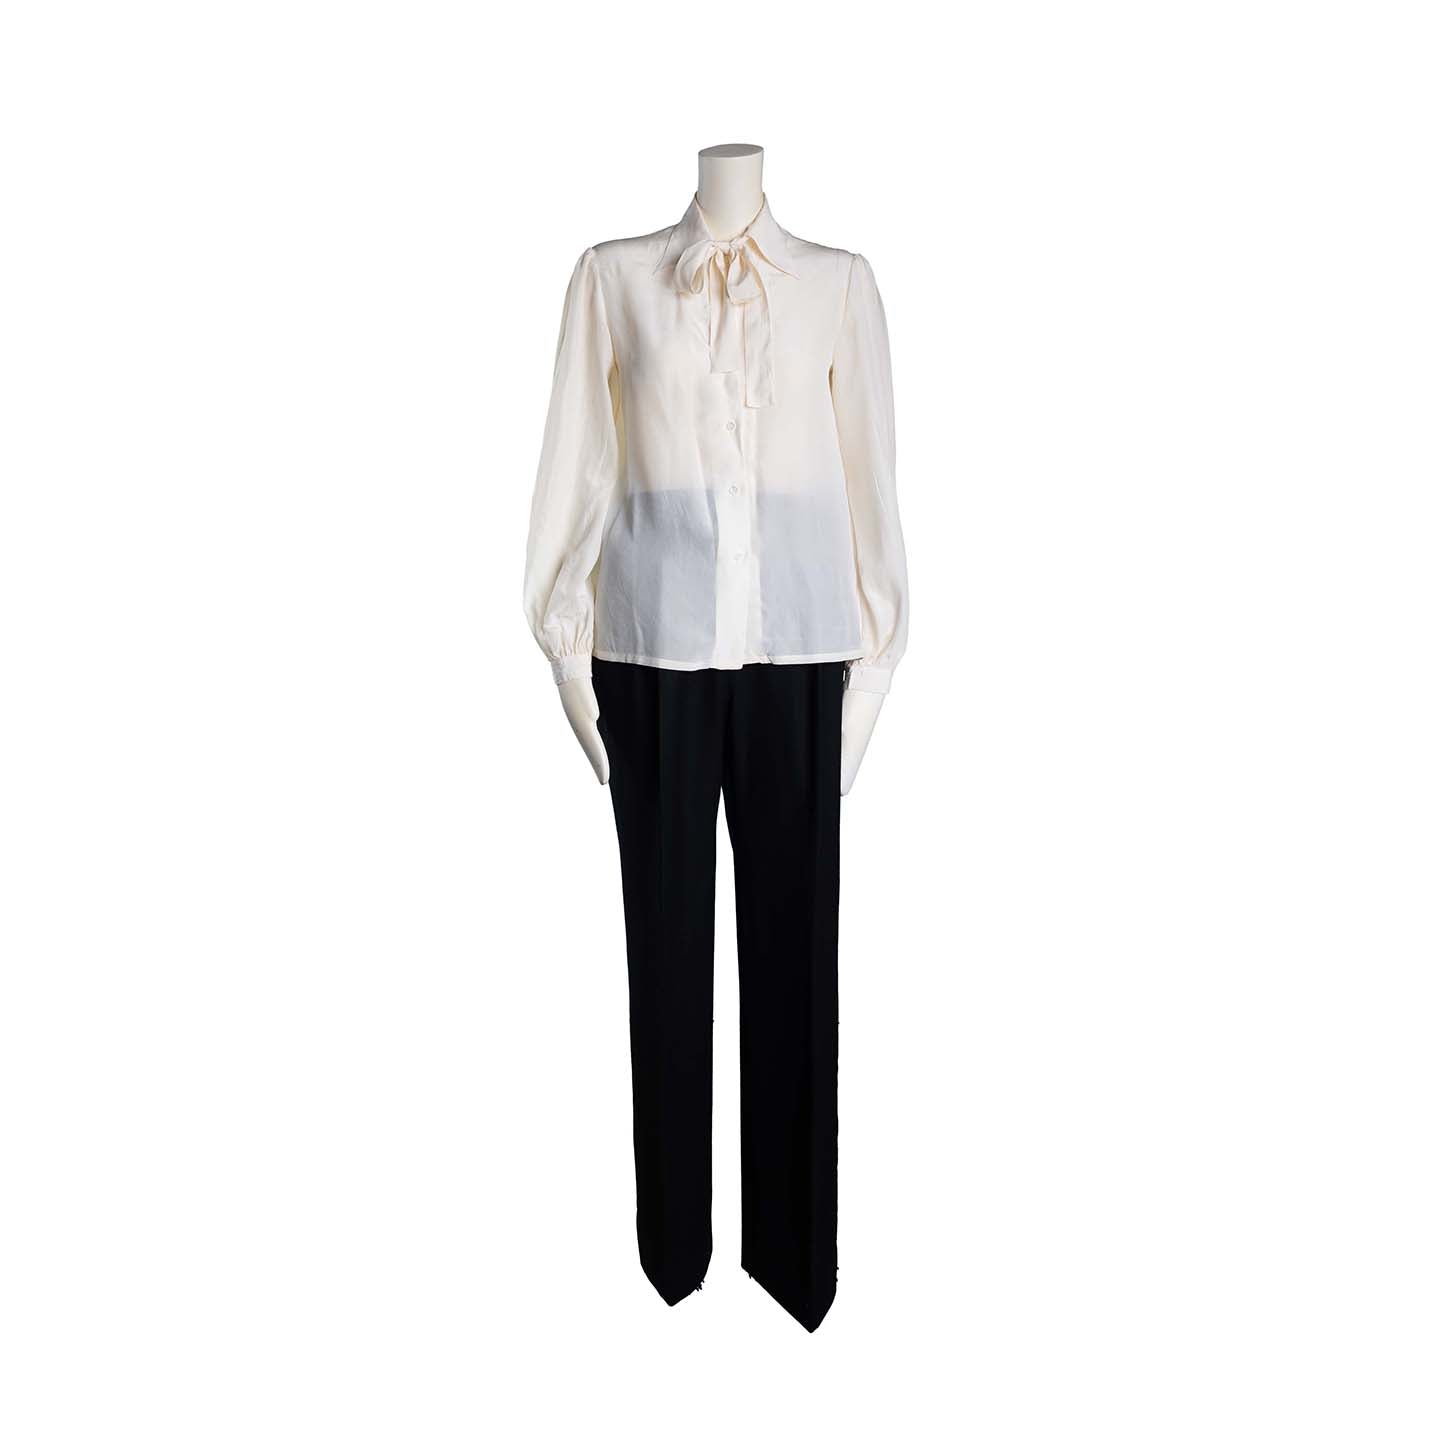 Lanvin silk blouse with lavalliere collar - M - 1970s